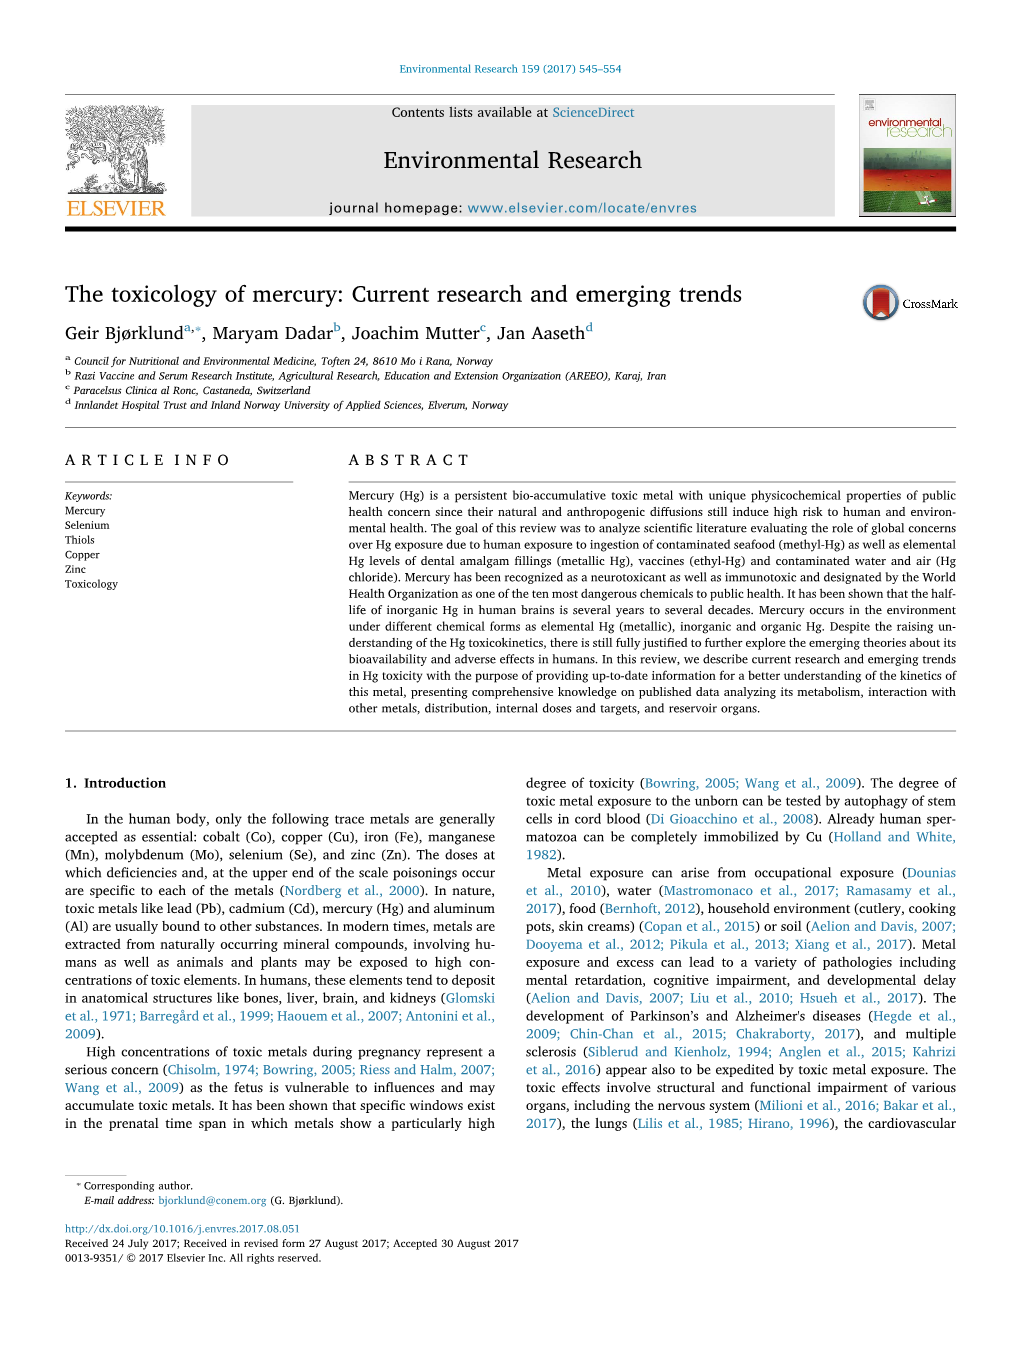 The Toxicology of Mercury Current Research and Emerging Trends